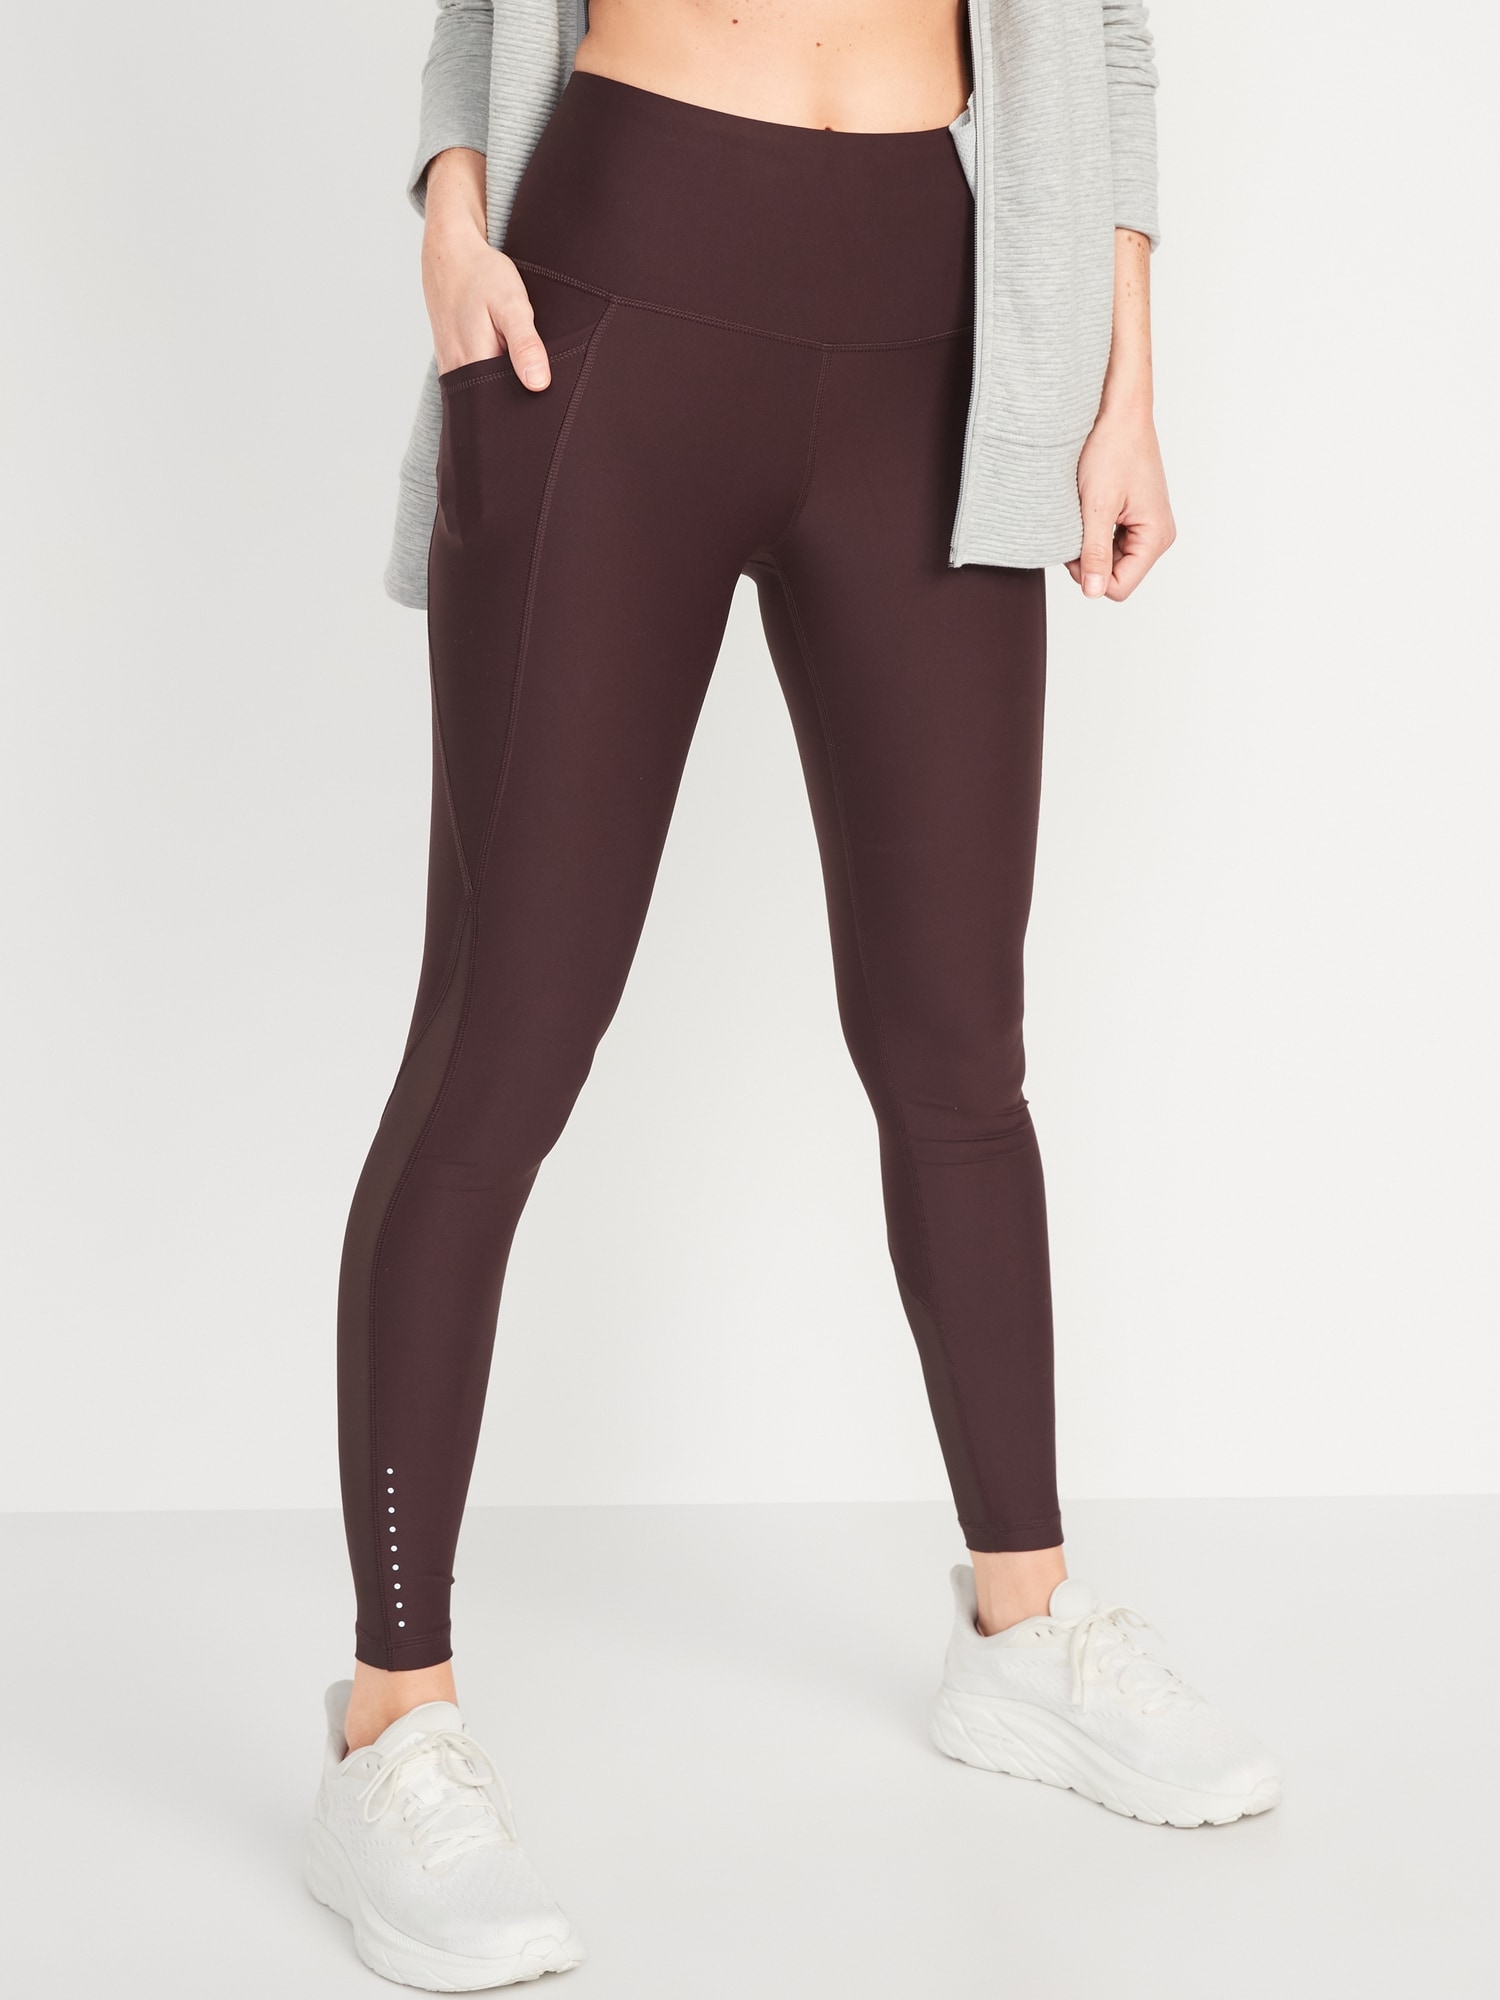 Old Navy Powerpress Leggings Review  International Society of Precision  Agriculture